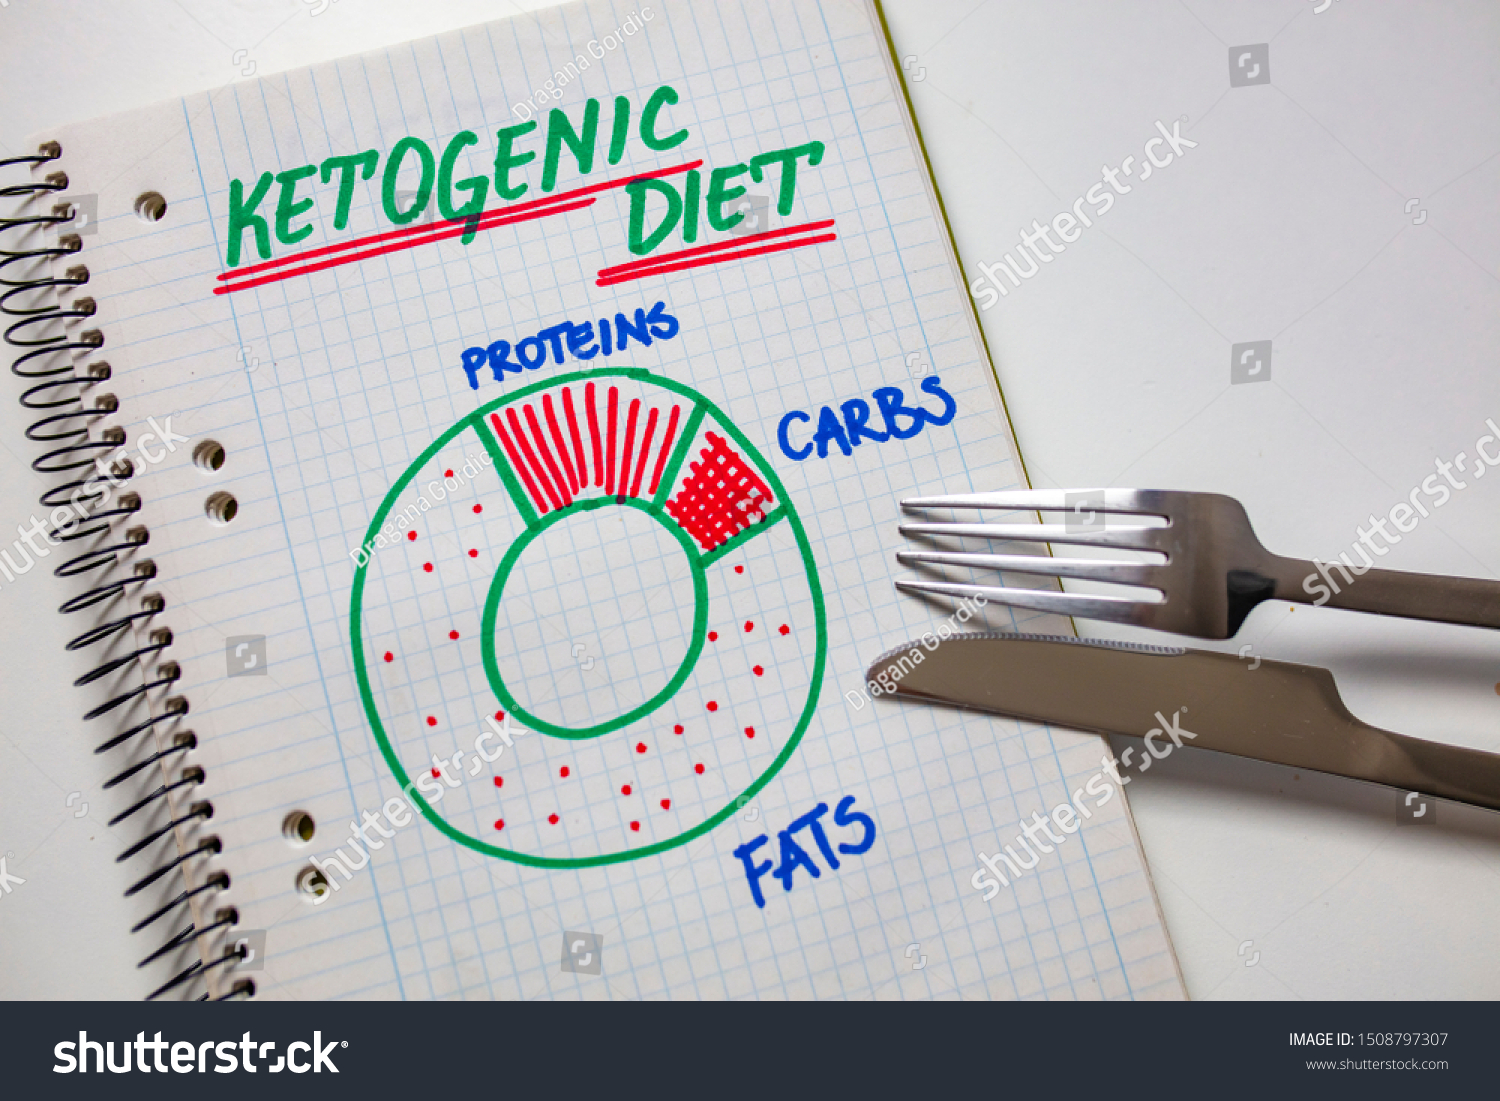 Ketogenic diet with nutrition diagram written on a note. Keto, ketogenic diet with nutrition diagram, low carb, high fat healthy weight loss meal plan. Healthy weight loss meal plan  #1508797307